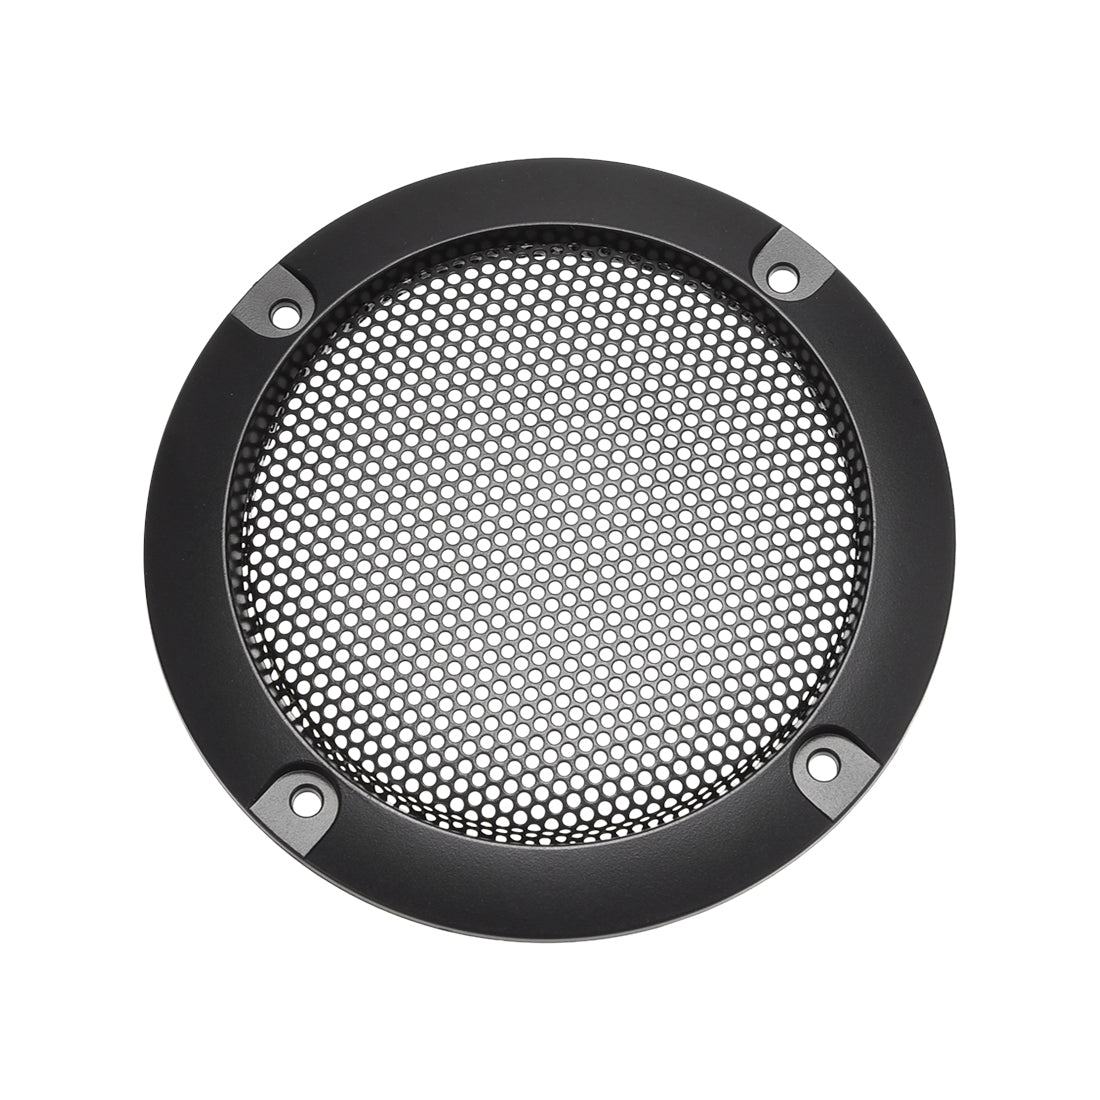 uxcell Uxcell Grill Cover 3 Inch 95mm Mesh Decorative Circle Subwoofer Guard Protector Black